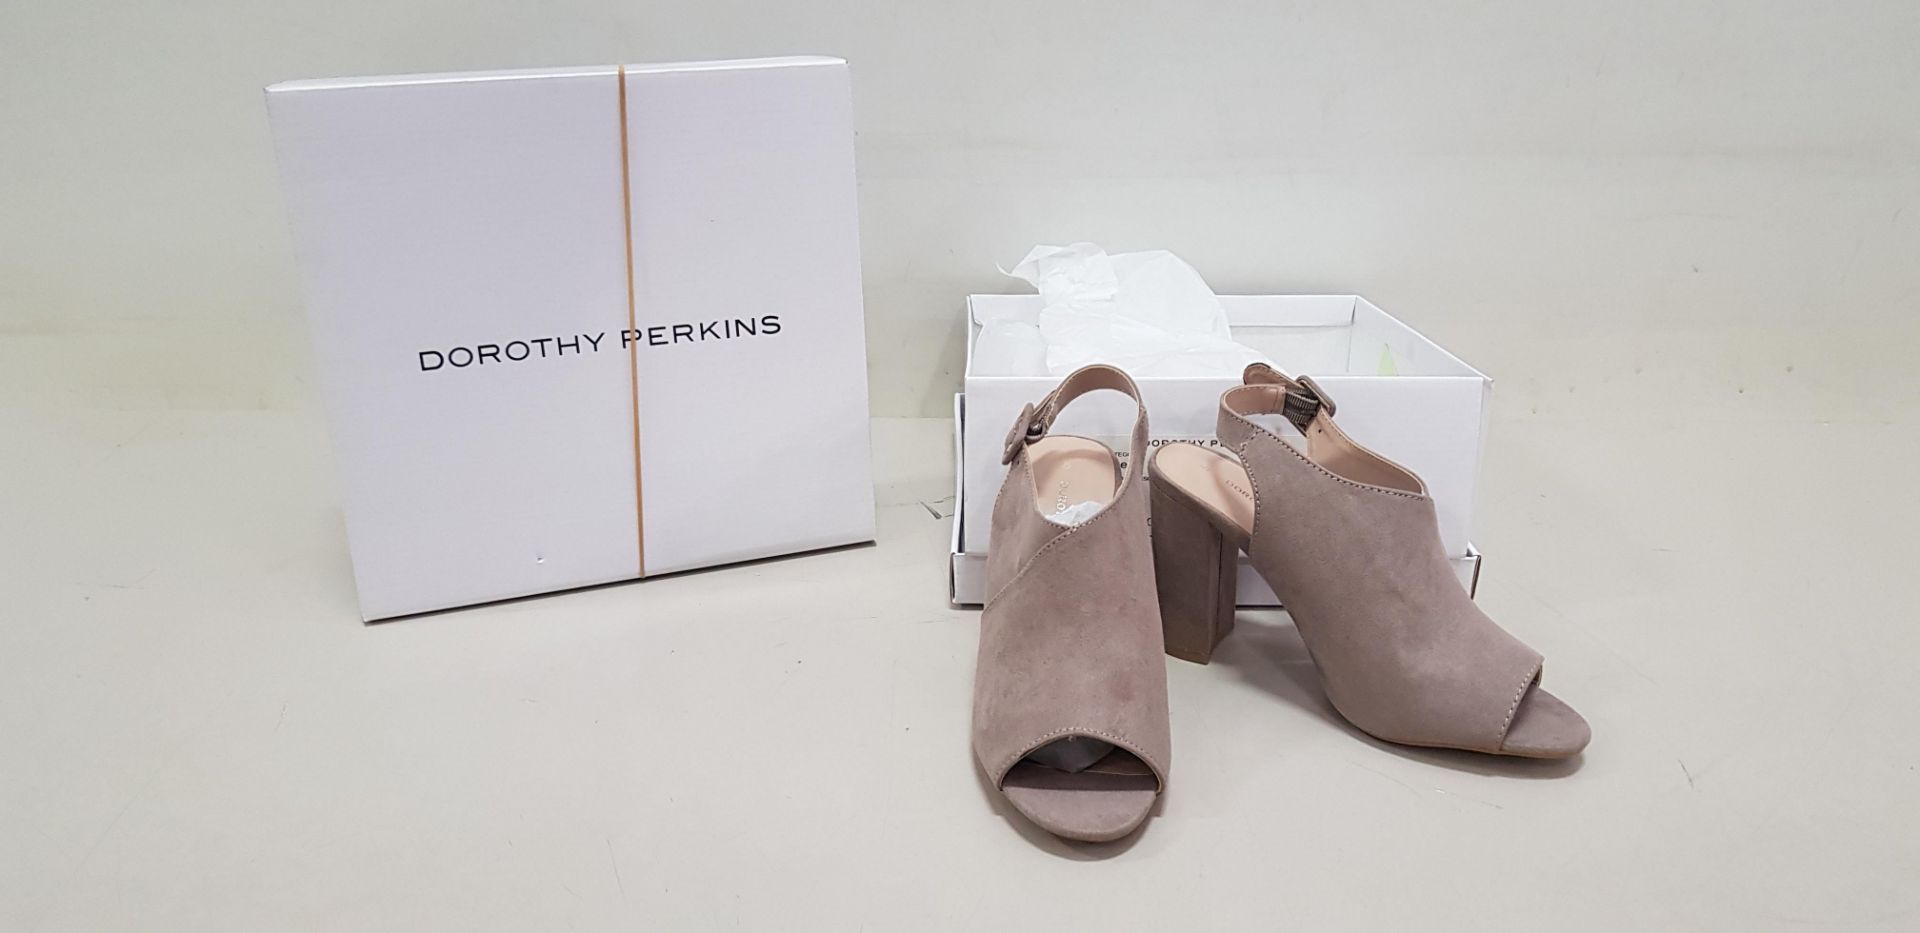 15 X BRAND NEW DOROTHY PERKINS HEELED SANDALS IN TAUPE SIZE 5 RRP £28.00 (TOTAL RRP £420.00)